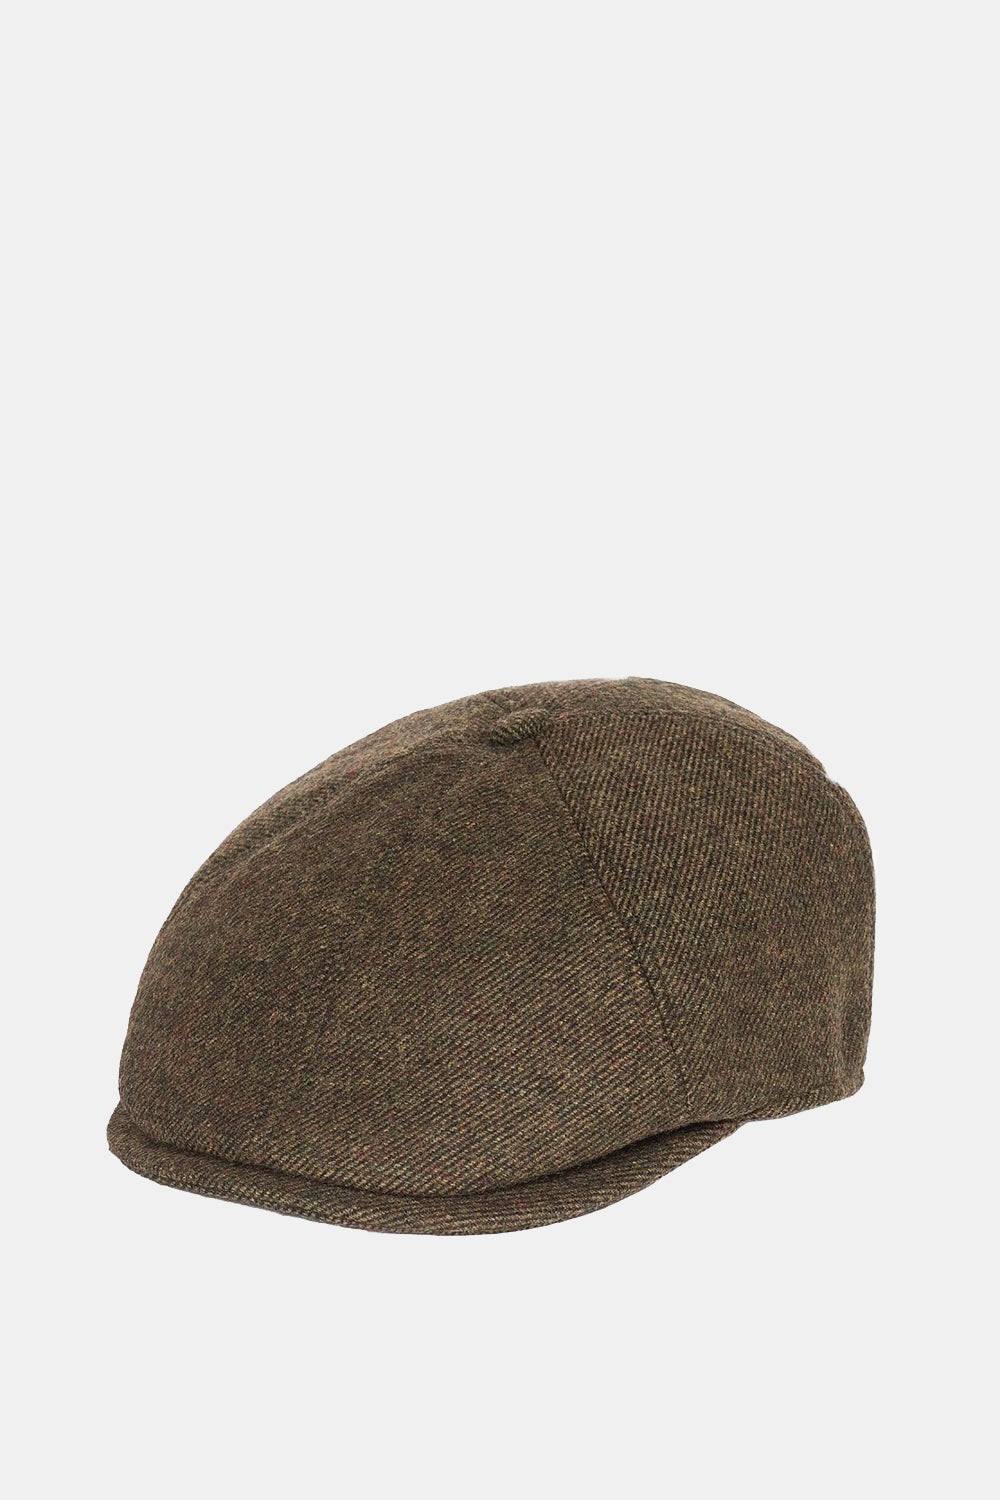 Barbour Claymore Bakerboy Flat Cap (Olive Twill) | Number Six